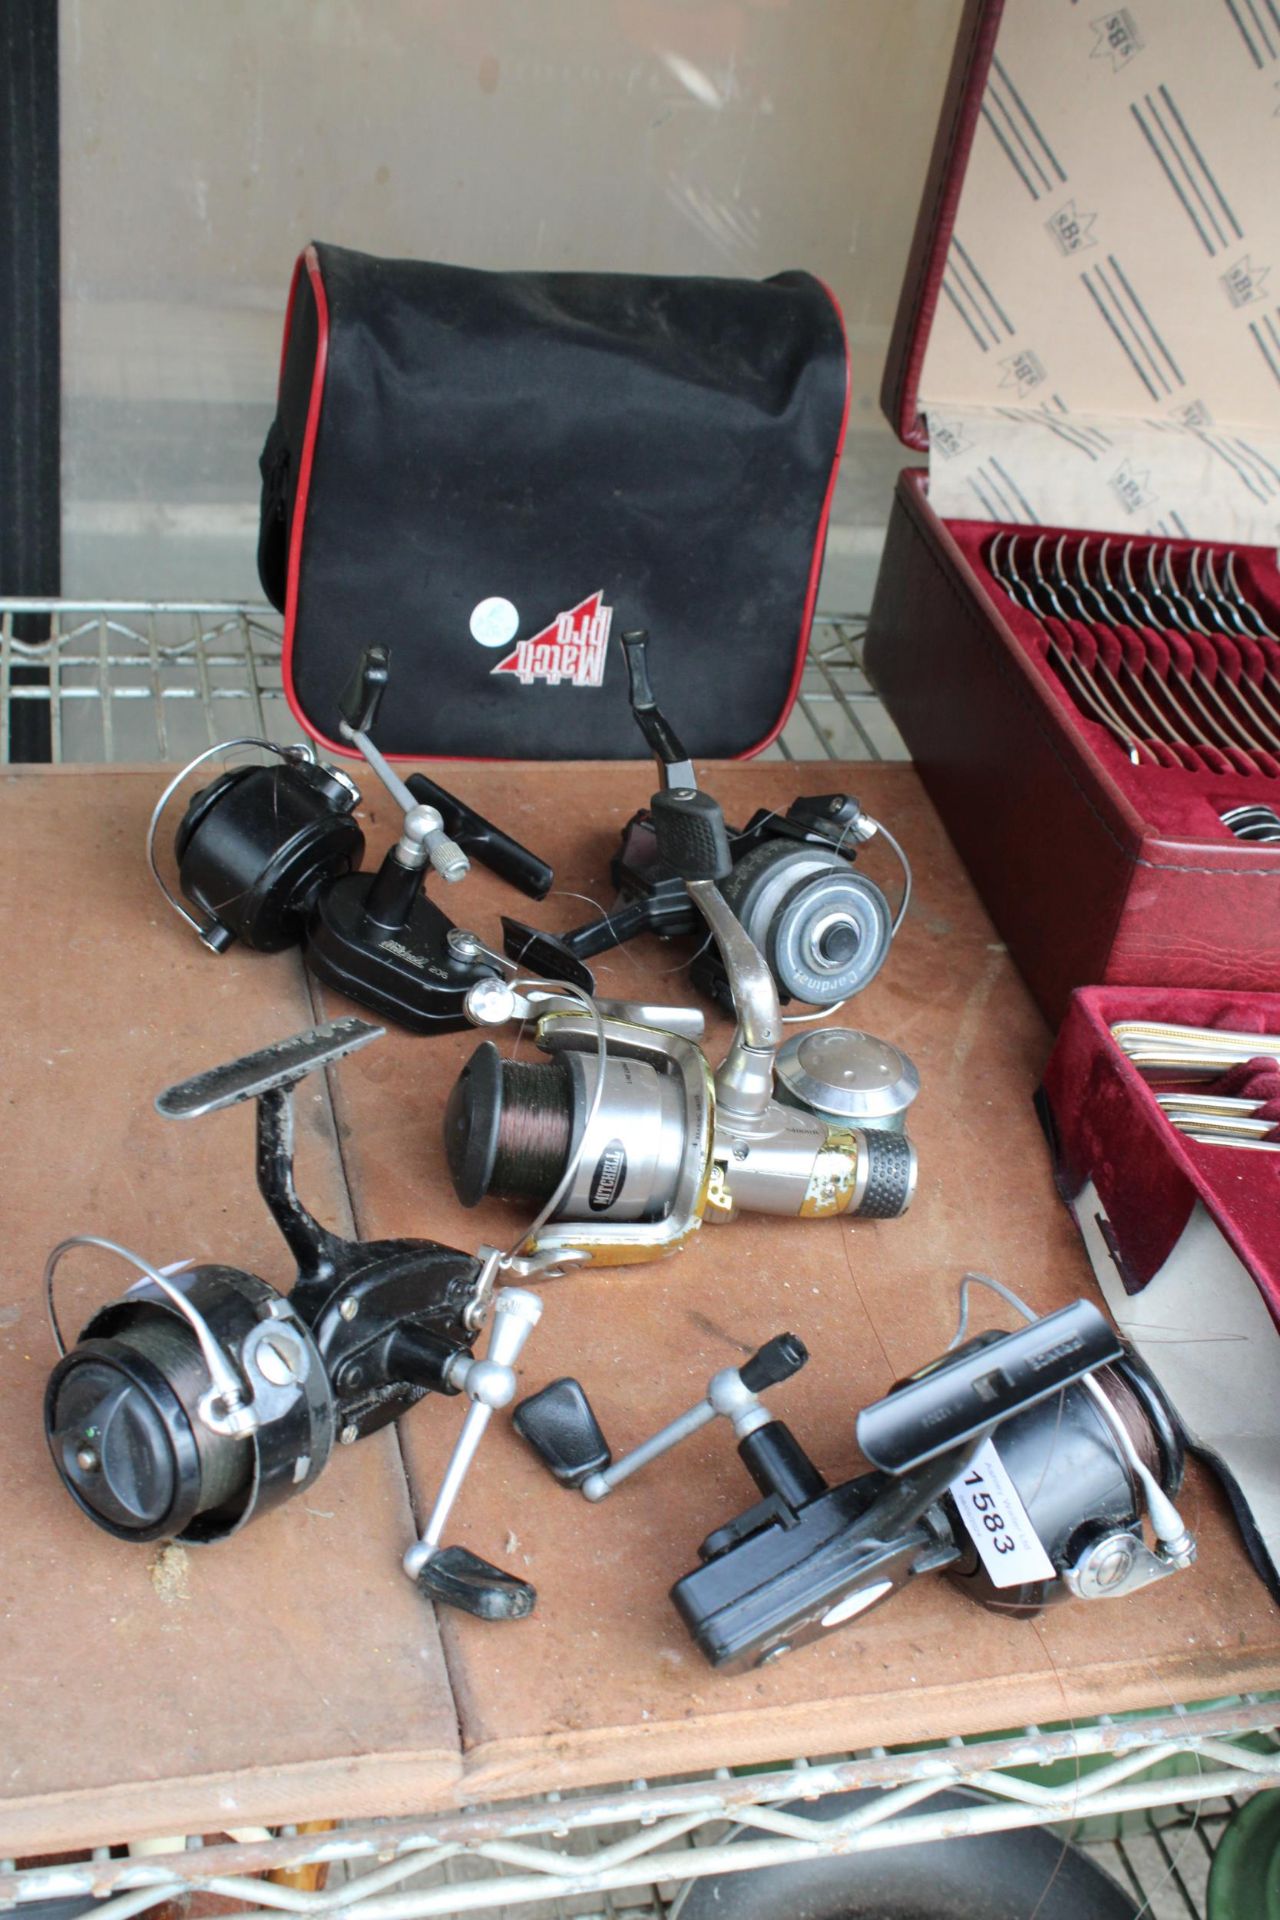 AN ASSORTMENT OF VARIOUS FISHING REELS TO INCLUDE MITCHELL AND ABU ETC